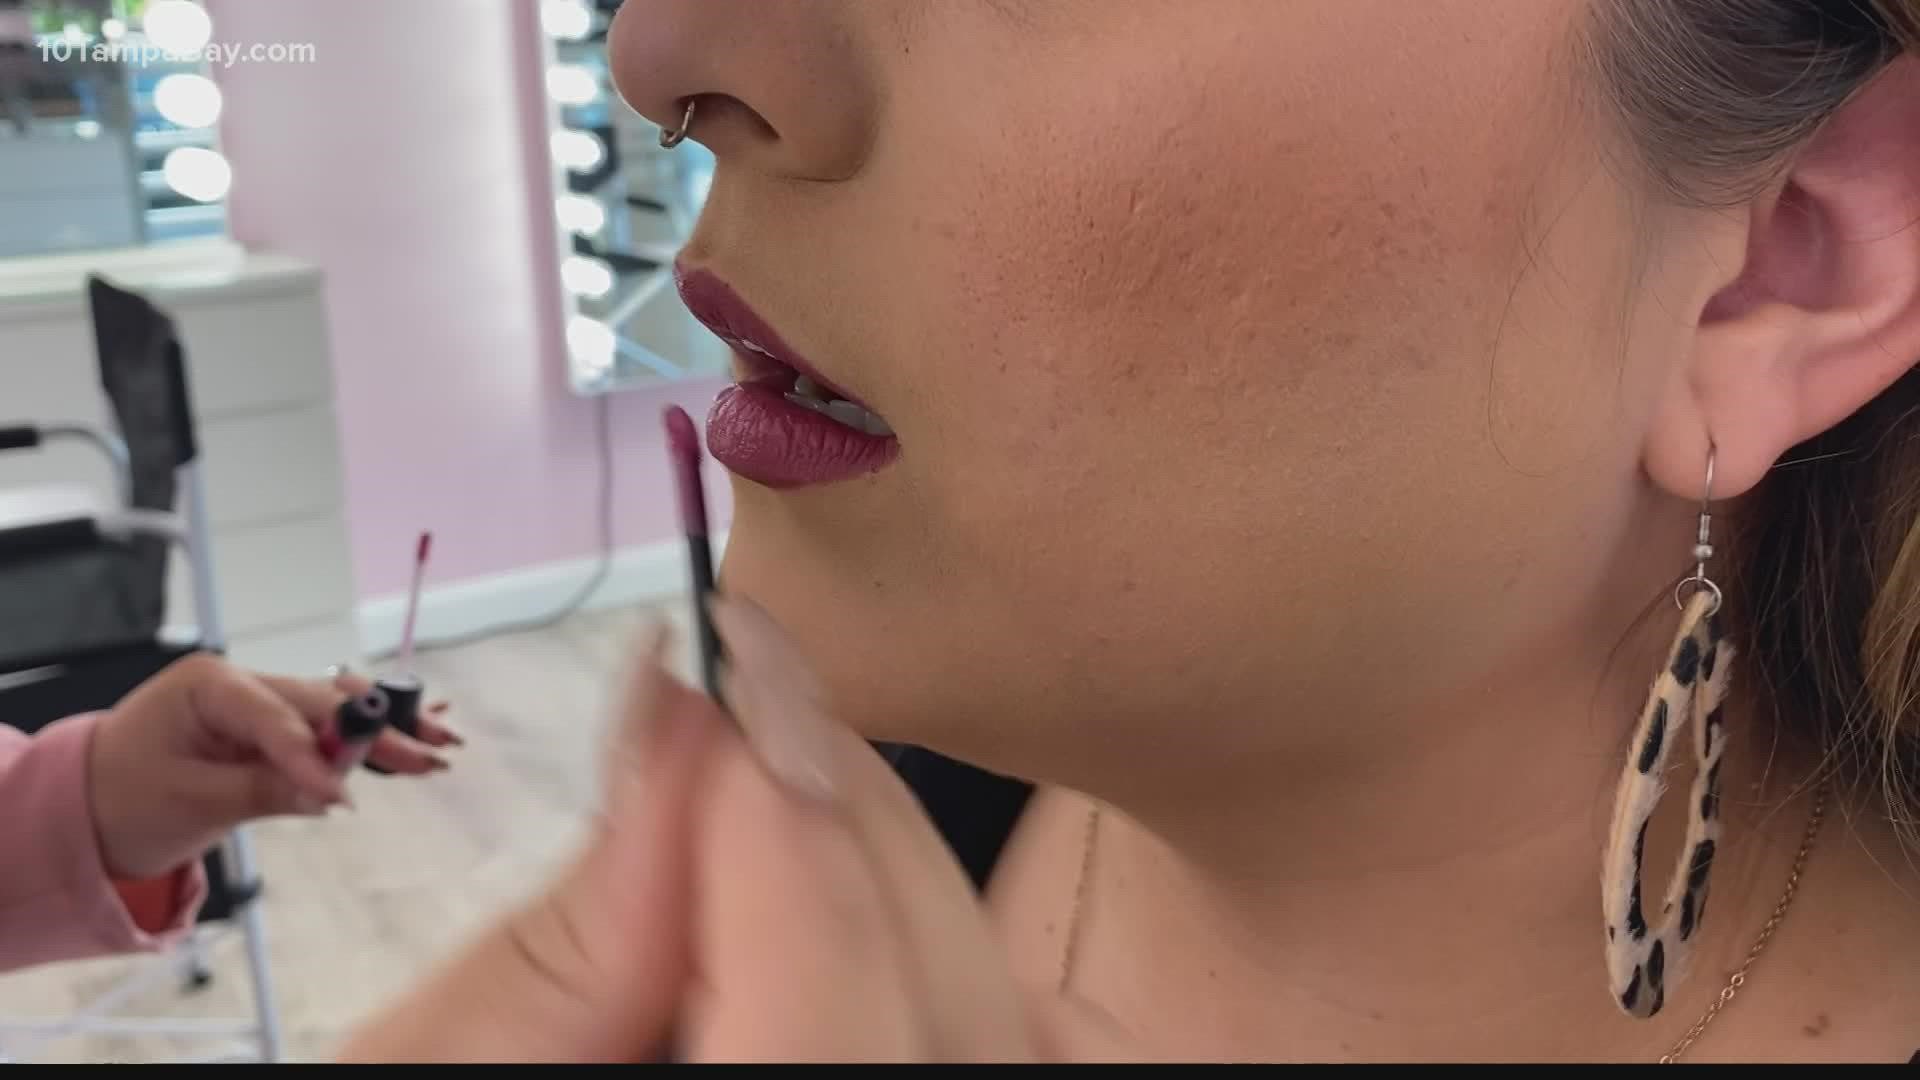 The Dolly Monroe Beauty Academy is projected to gross a million dollars in revenue this year after opening just two years ago.